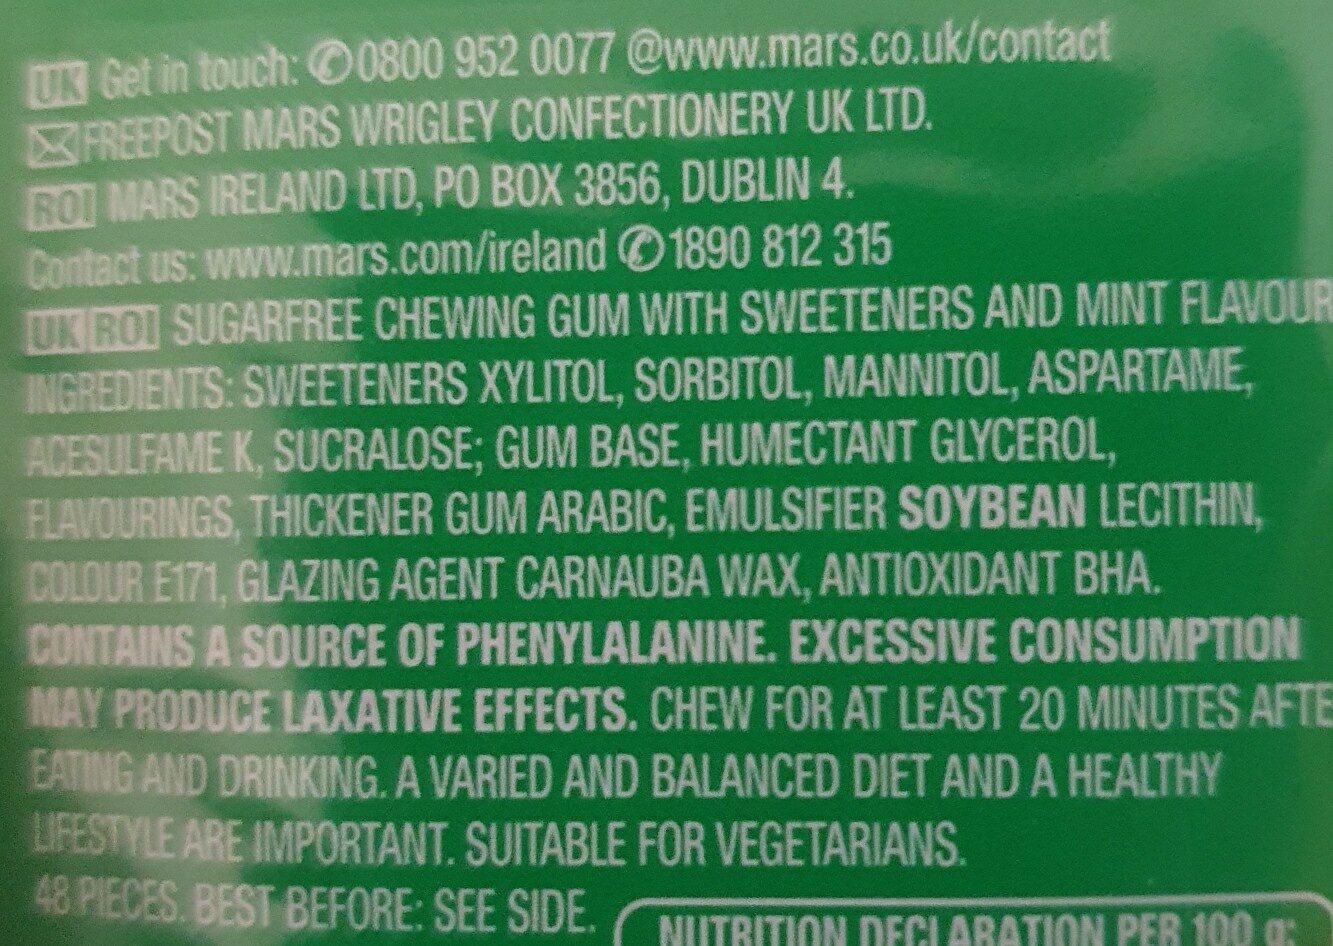 Extra Minis Spearmint Chewing Gum - Ingredients